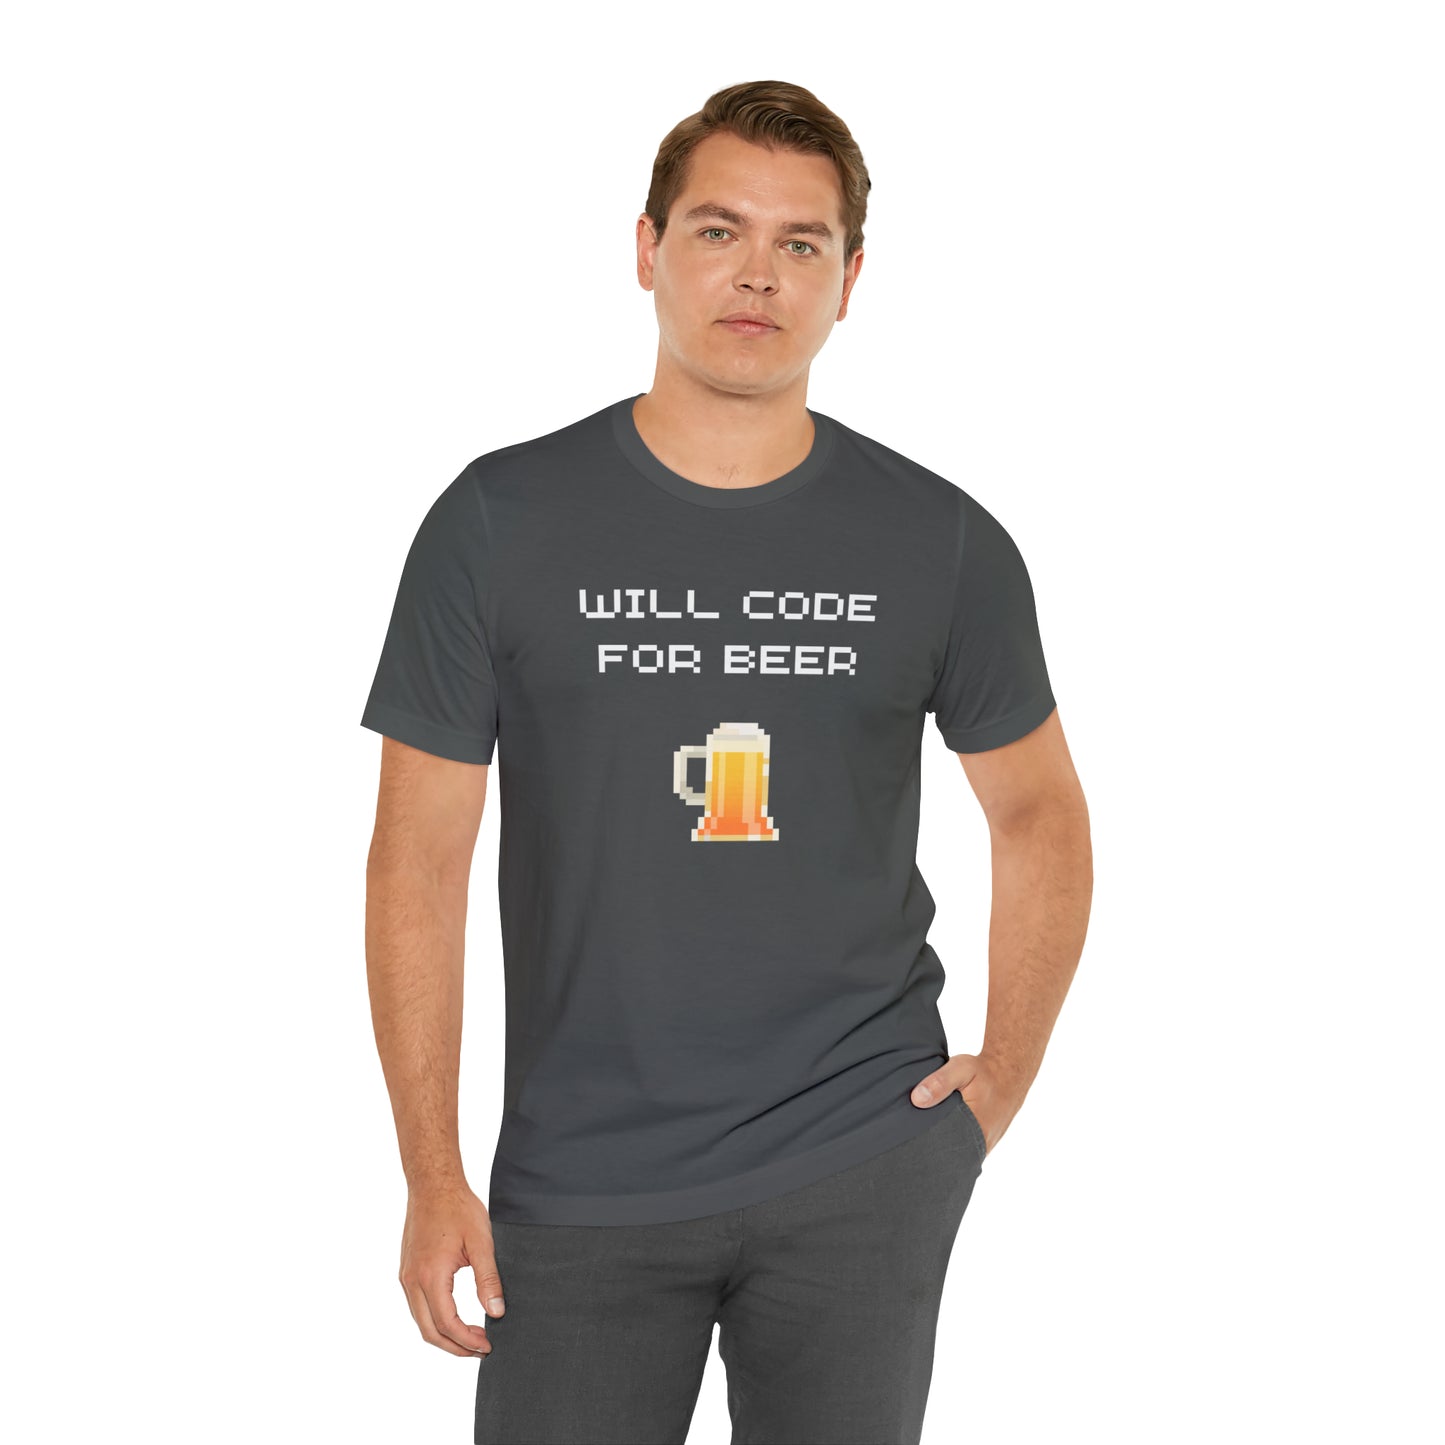 will code for beer t-shirt